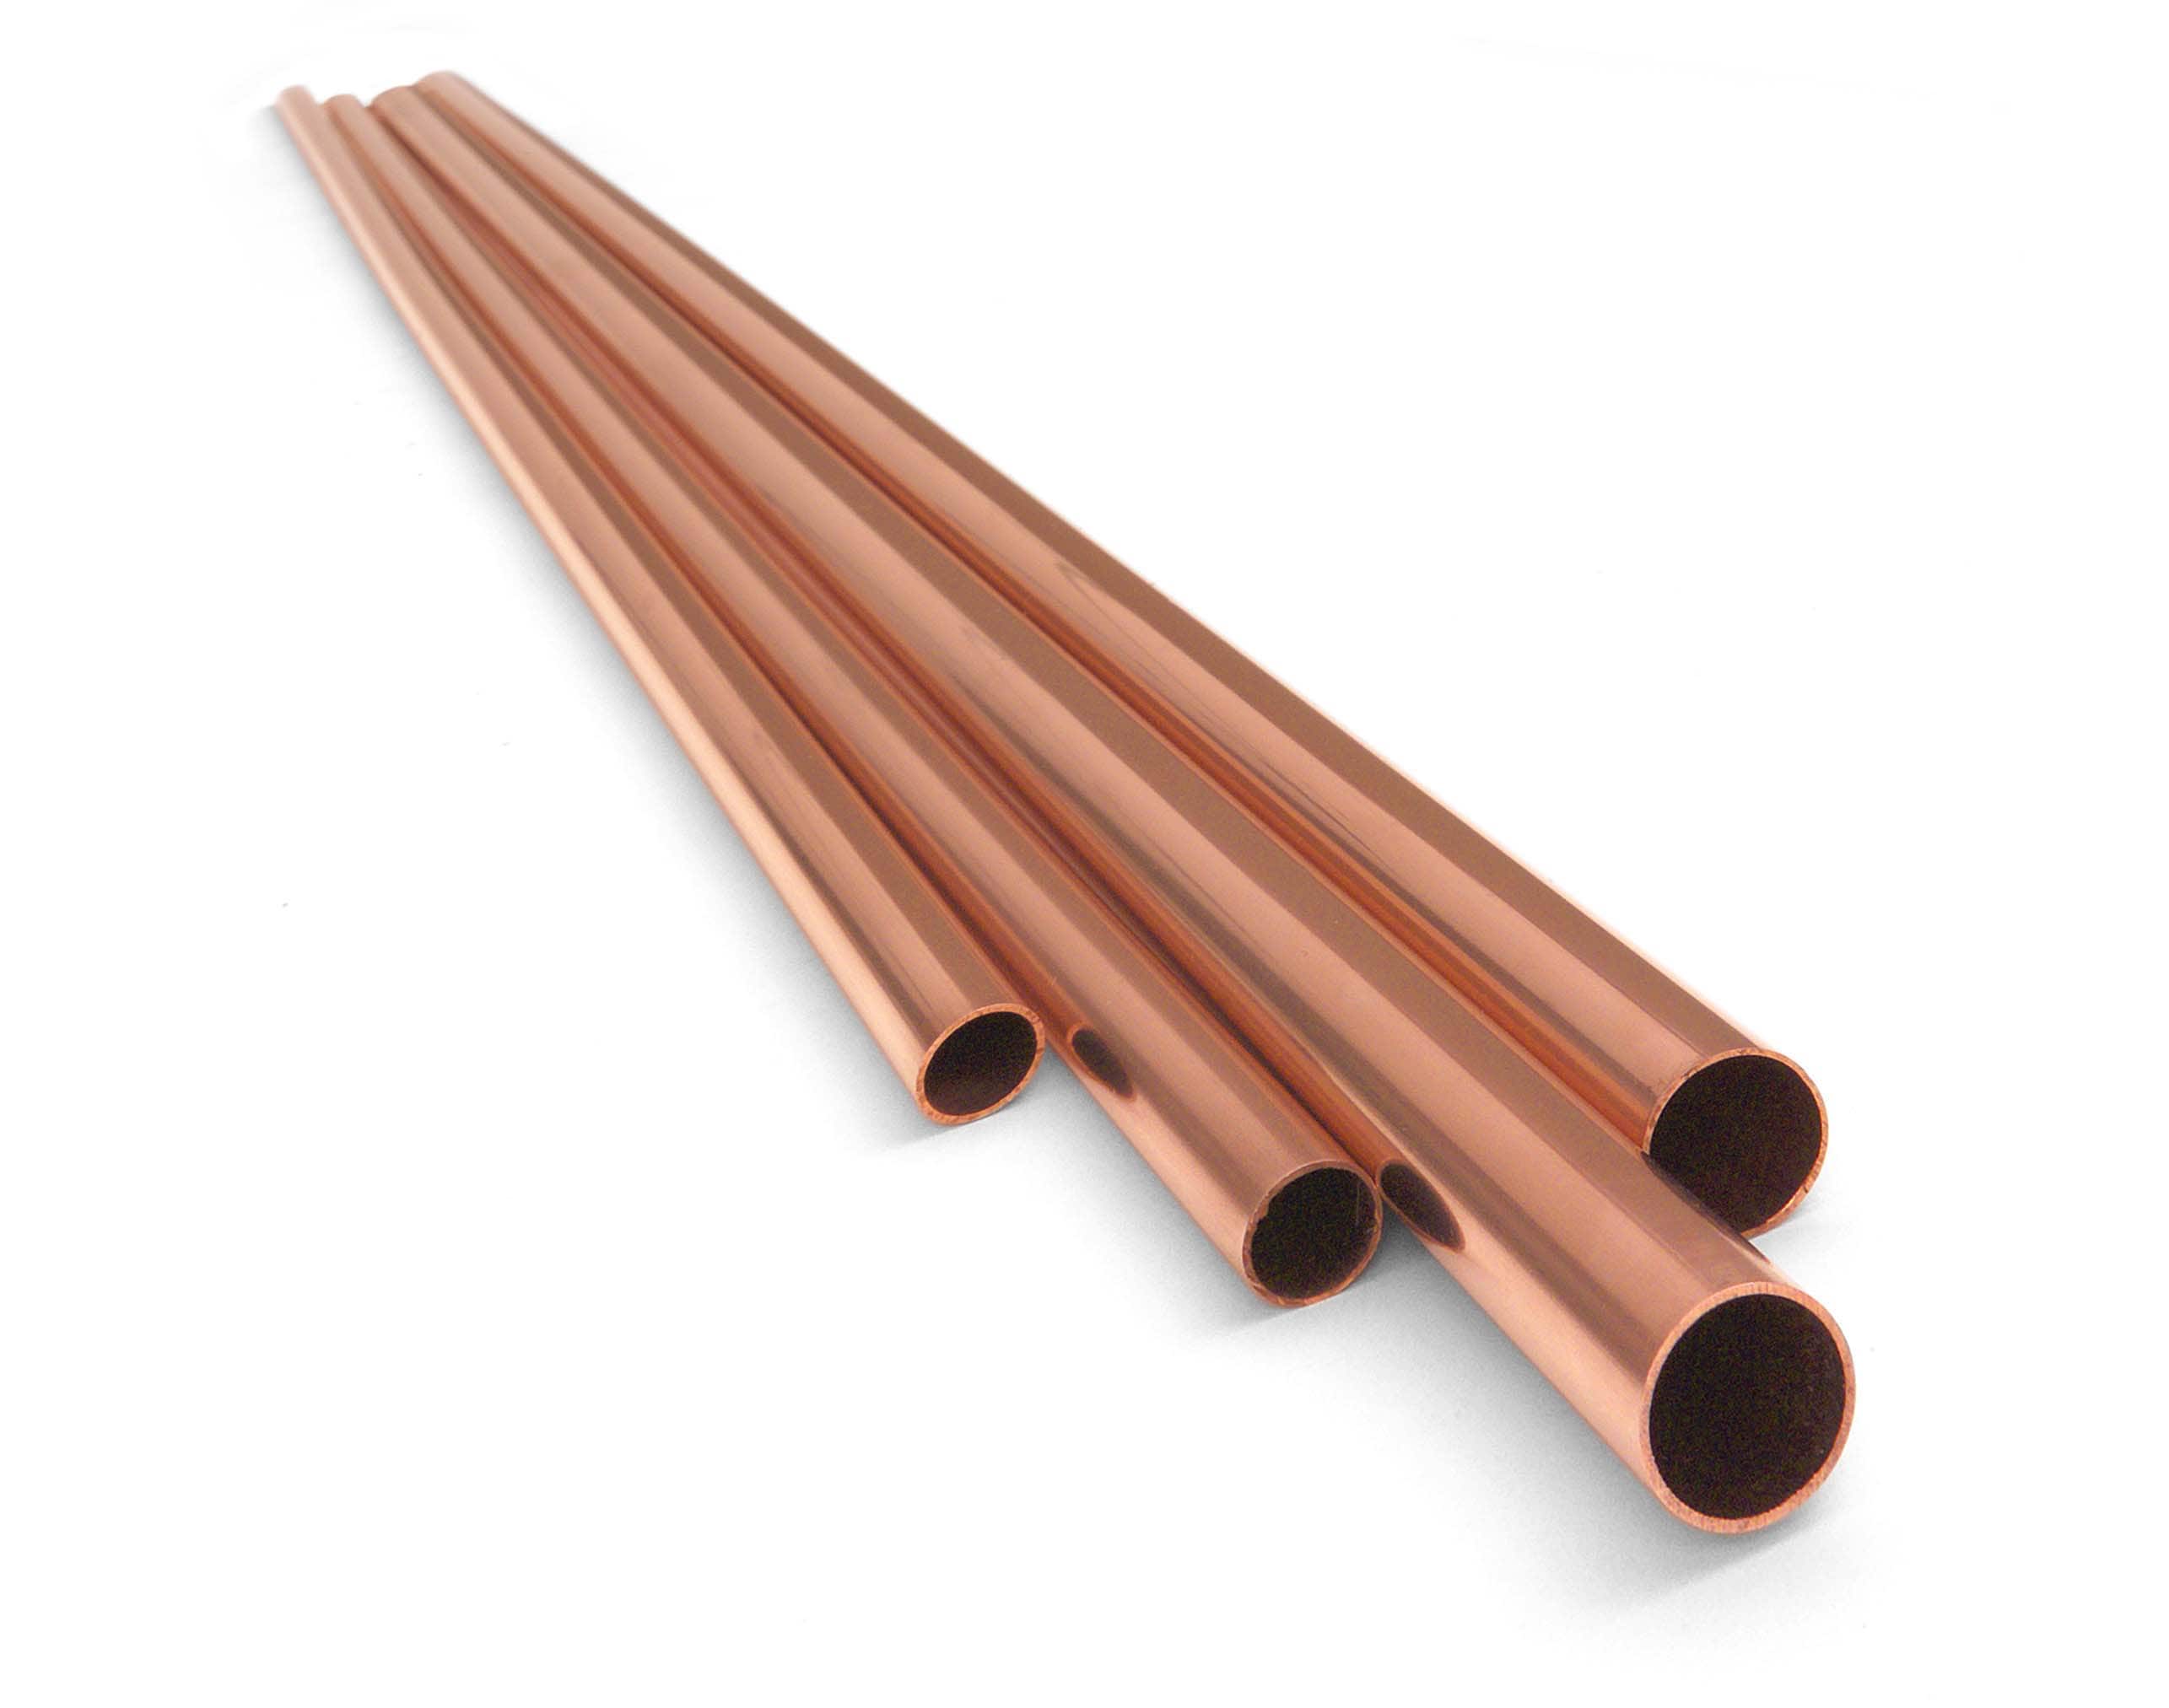 Copper Tubing At Lowes